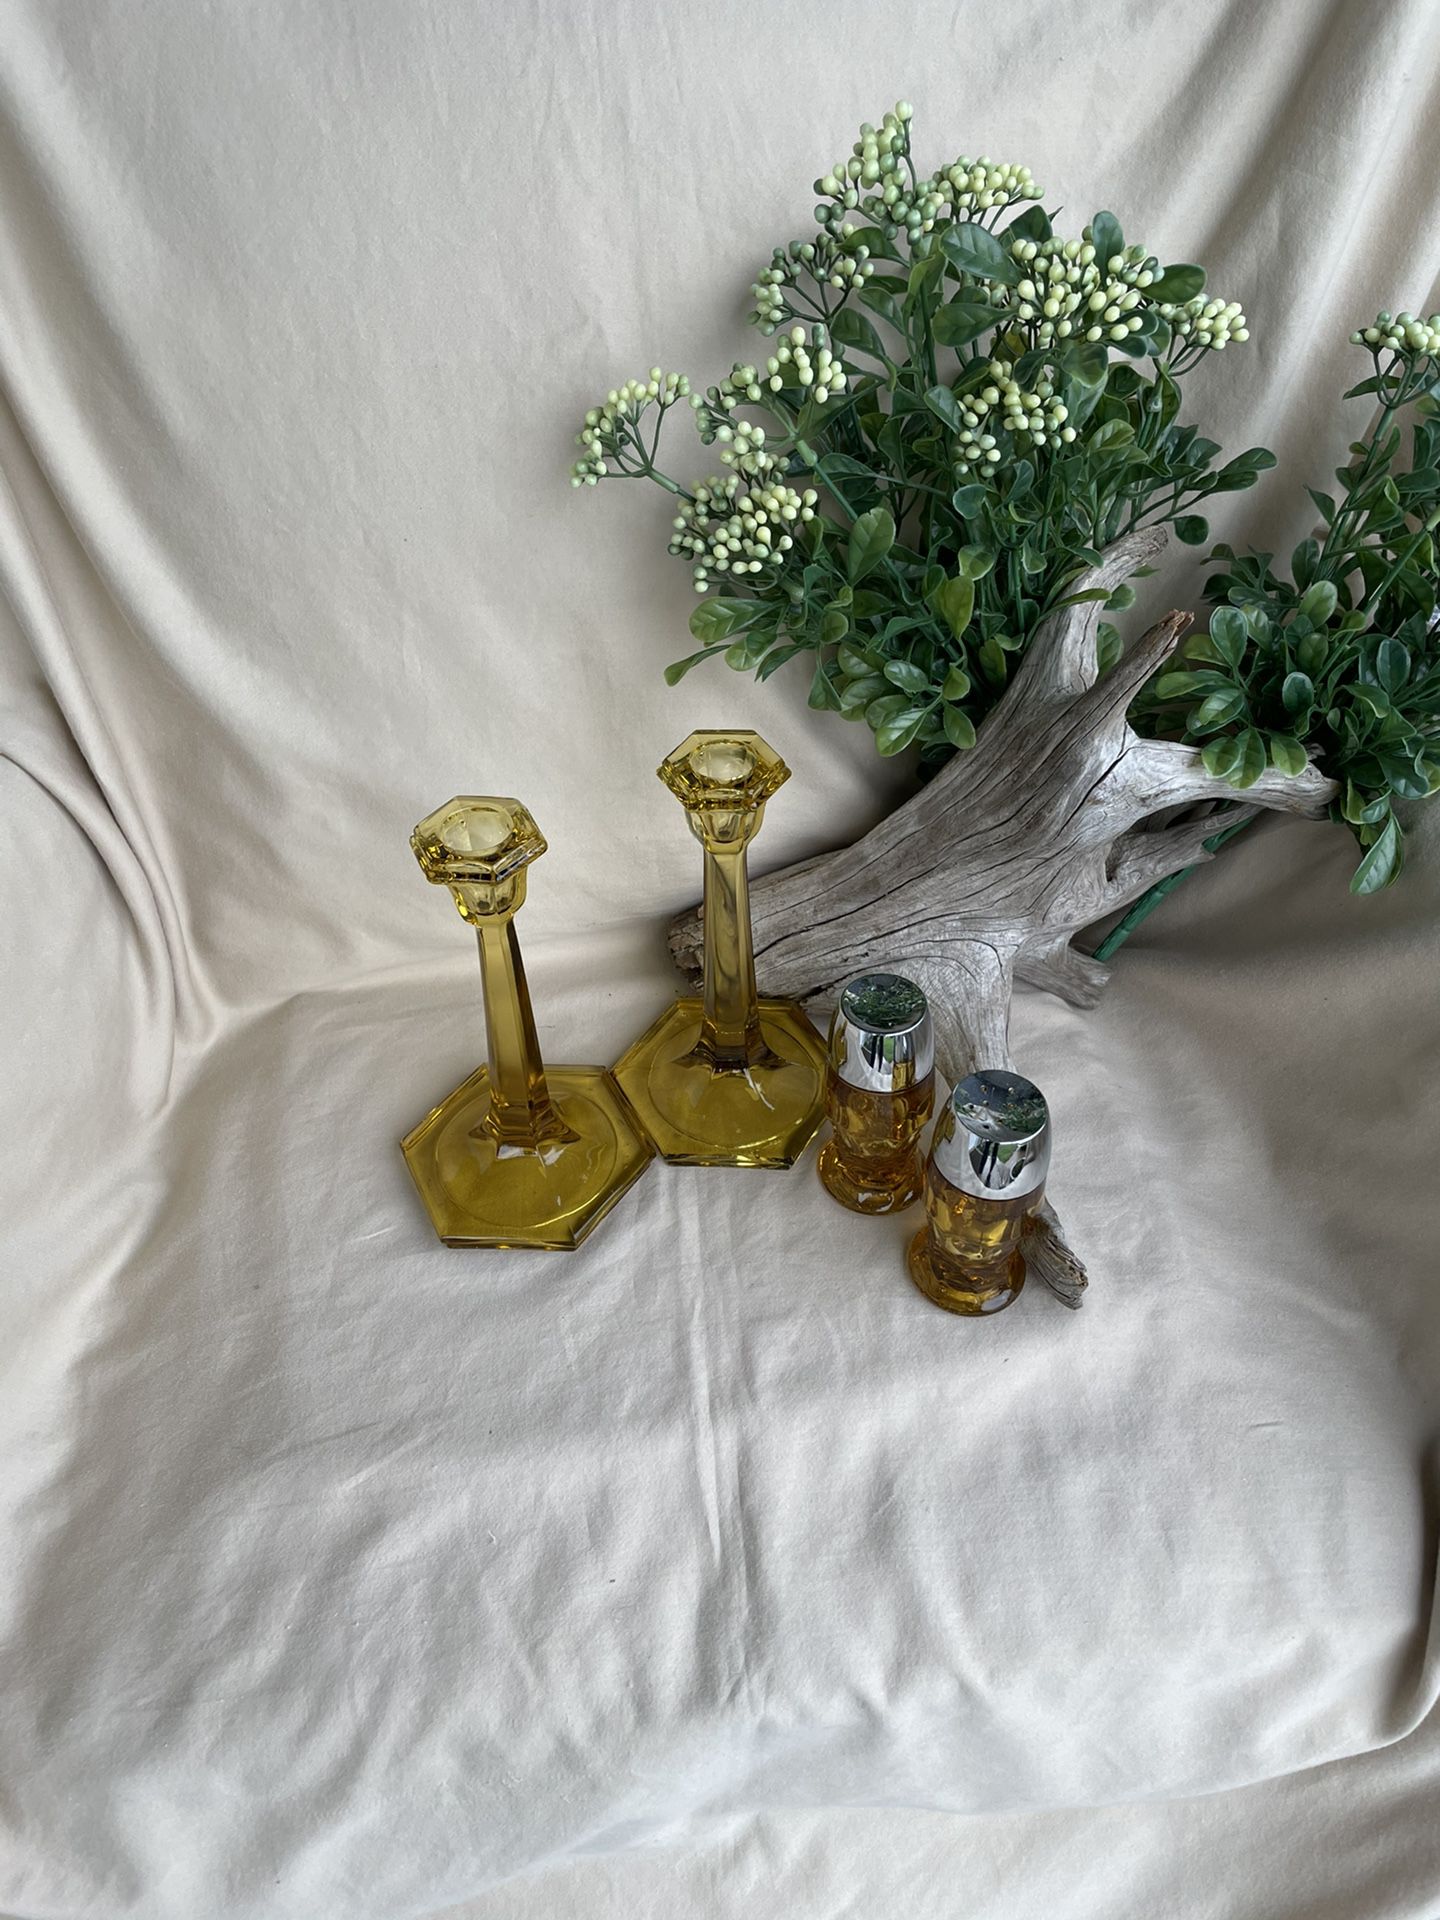 Salt & Pepper Shakers & Candle Holders